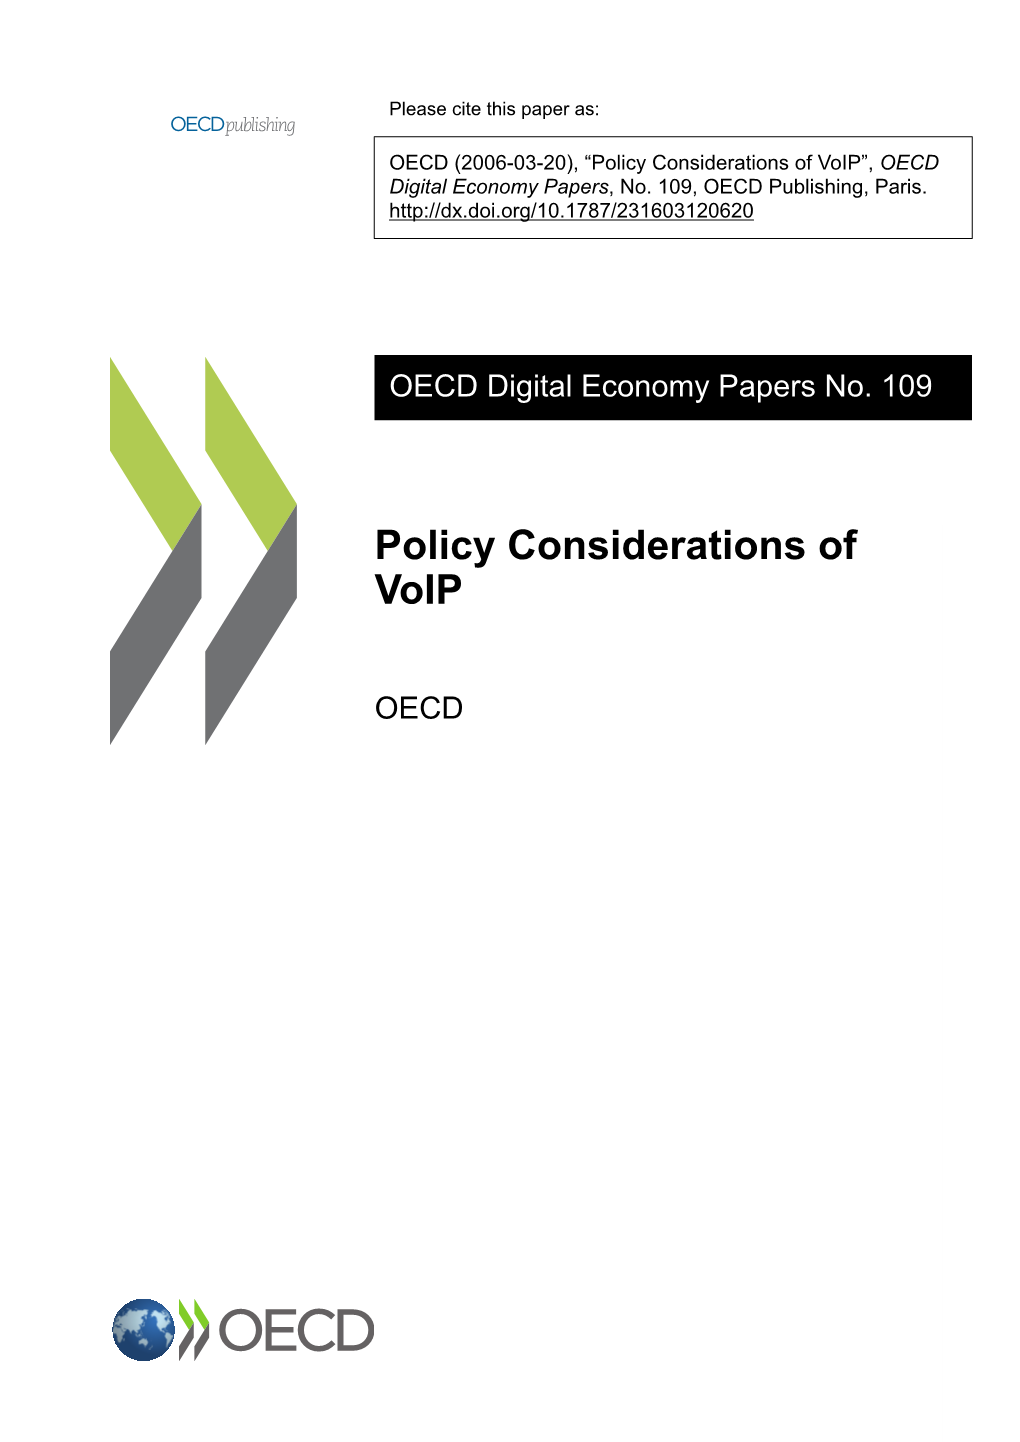 Policy Considerations of Voip”, OECD Digital Economy Papers, No